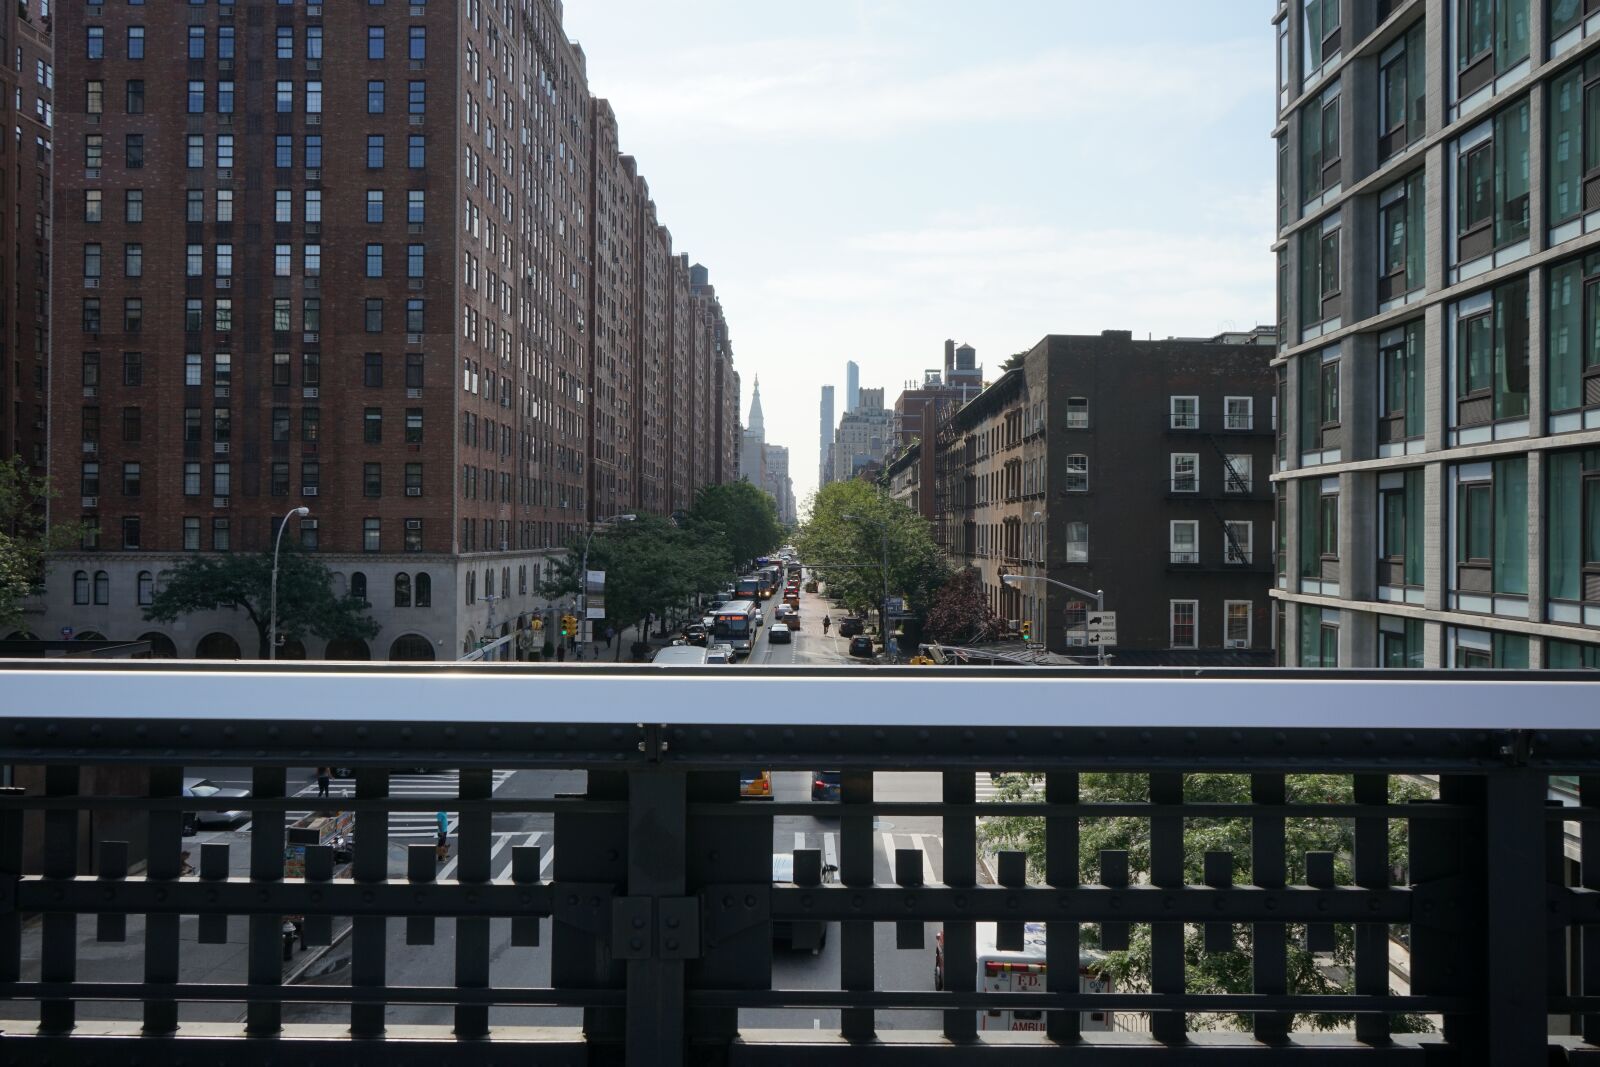 Sony a7 + Sony FE 28-70mm F3.5-5.6 OSS sample photo. The high line, nyc photography